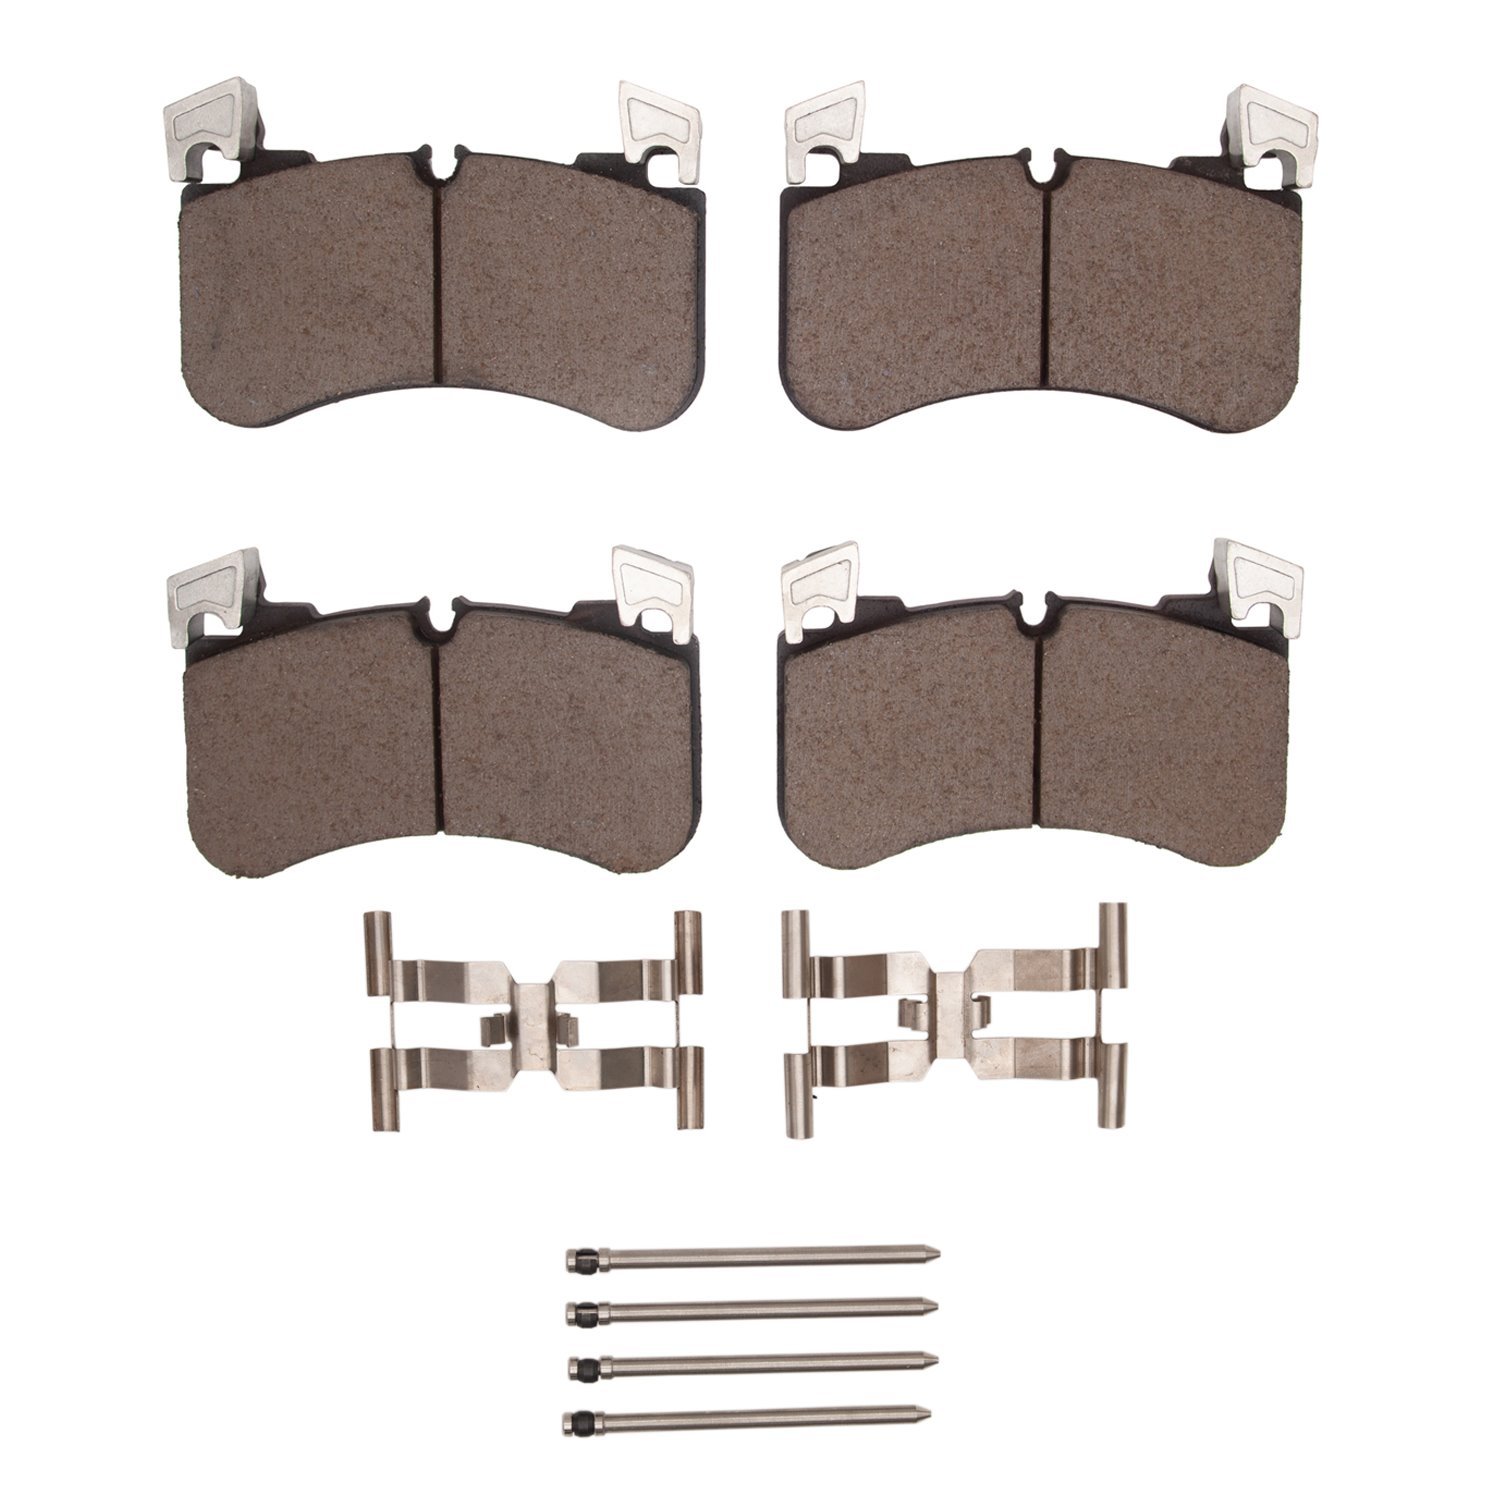 1310-2184-01 3000-Series Ceramic Brake Pads & Hardware Kit, Fits Select Land Rover, Position: Front